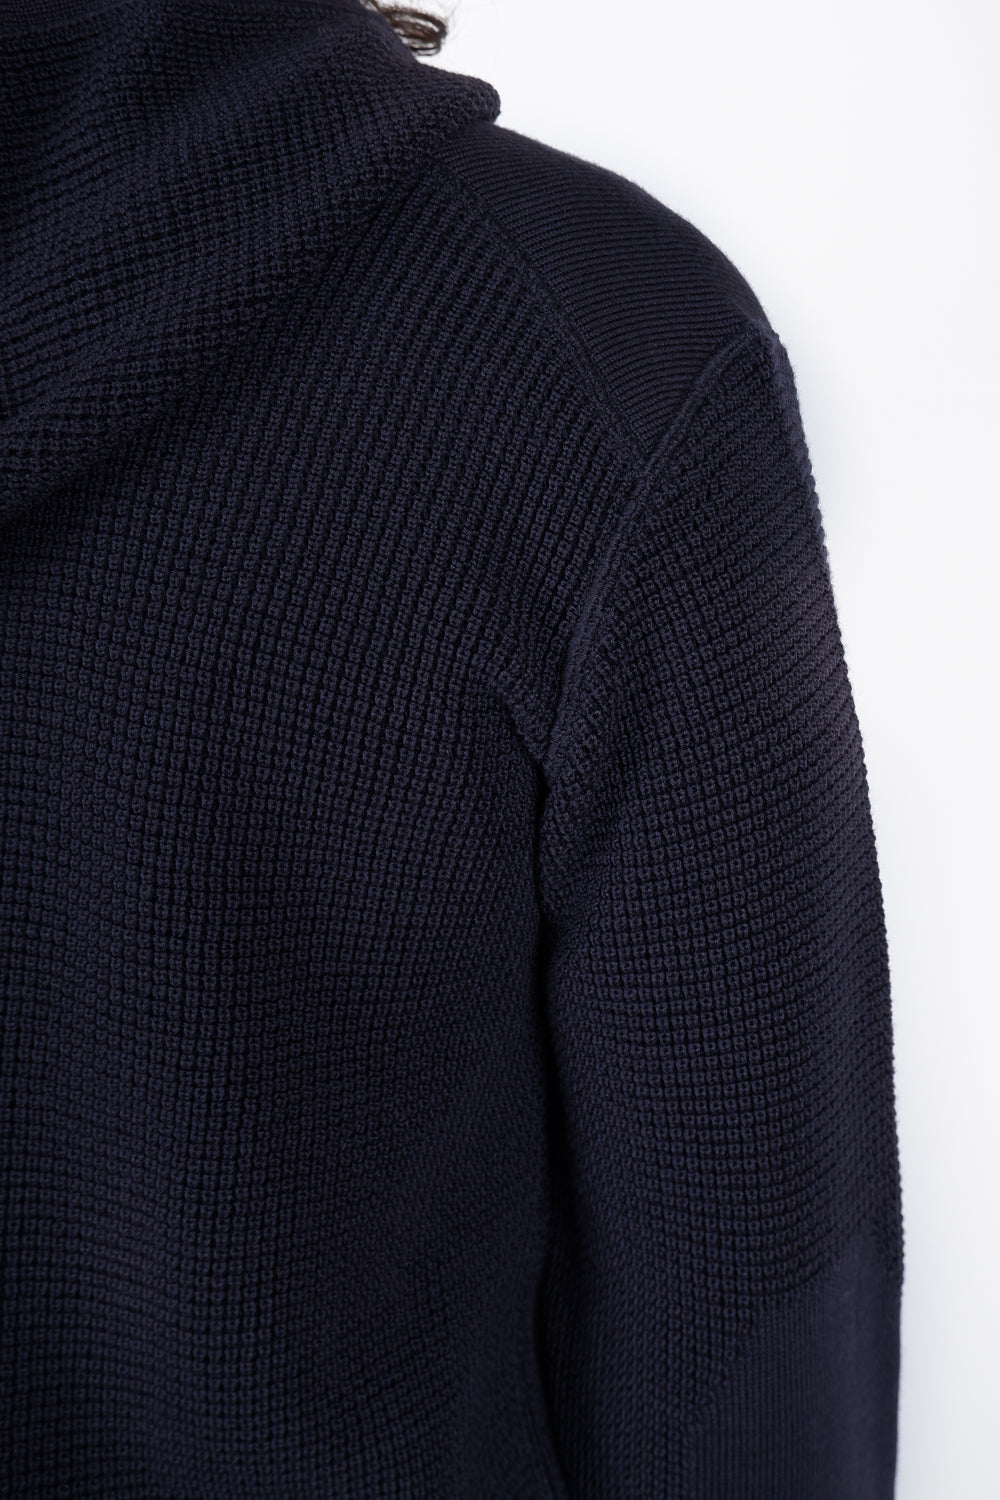 Buy the Hannes Roether Zip-Up Wool Cardigan in Navy at Intro. Spend £50 for free UK delivery. Official stockists. We ship worldwide.